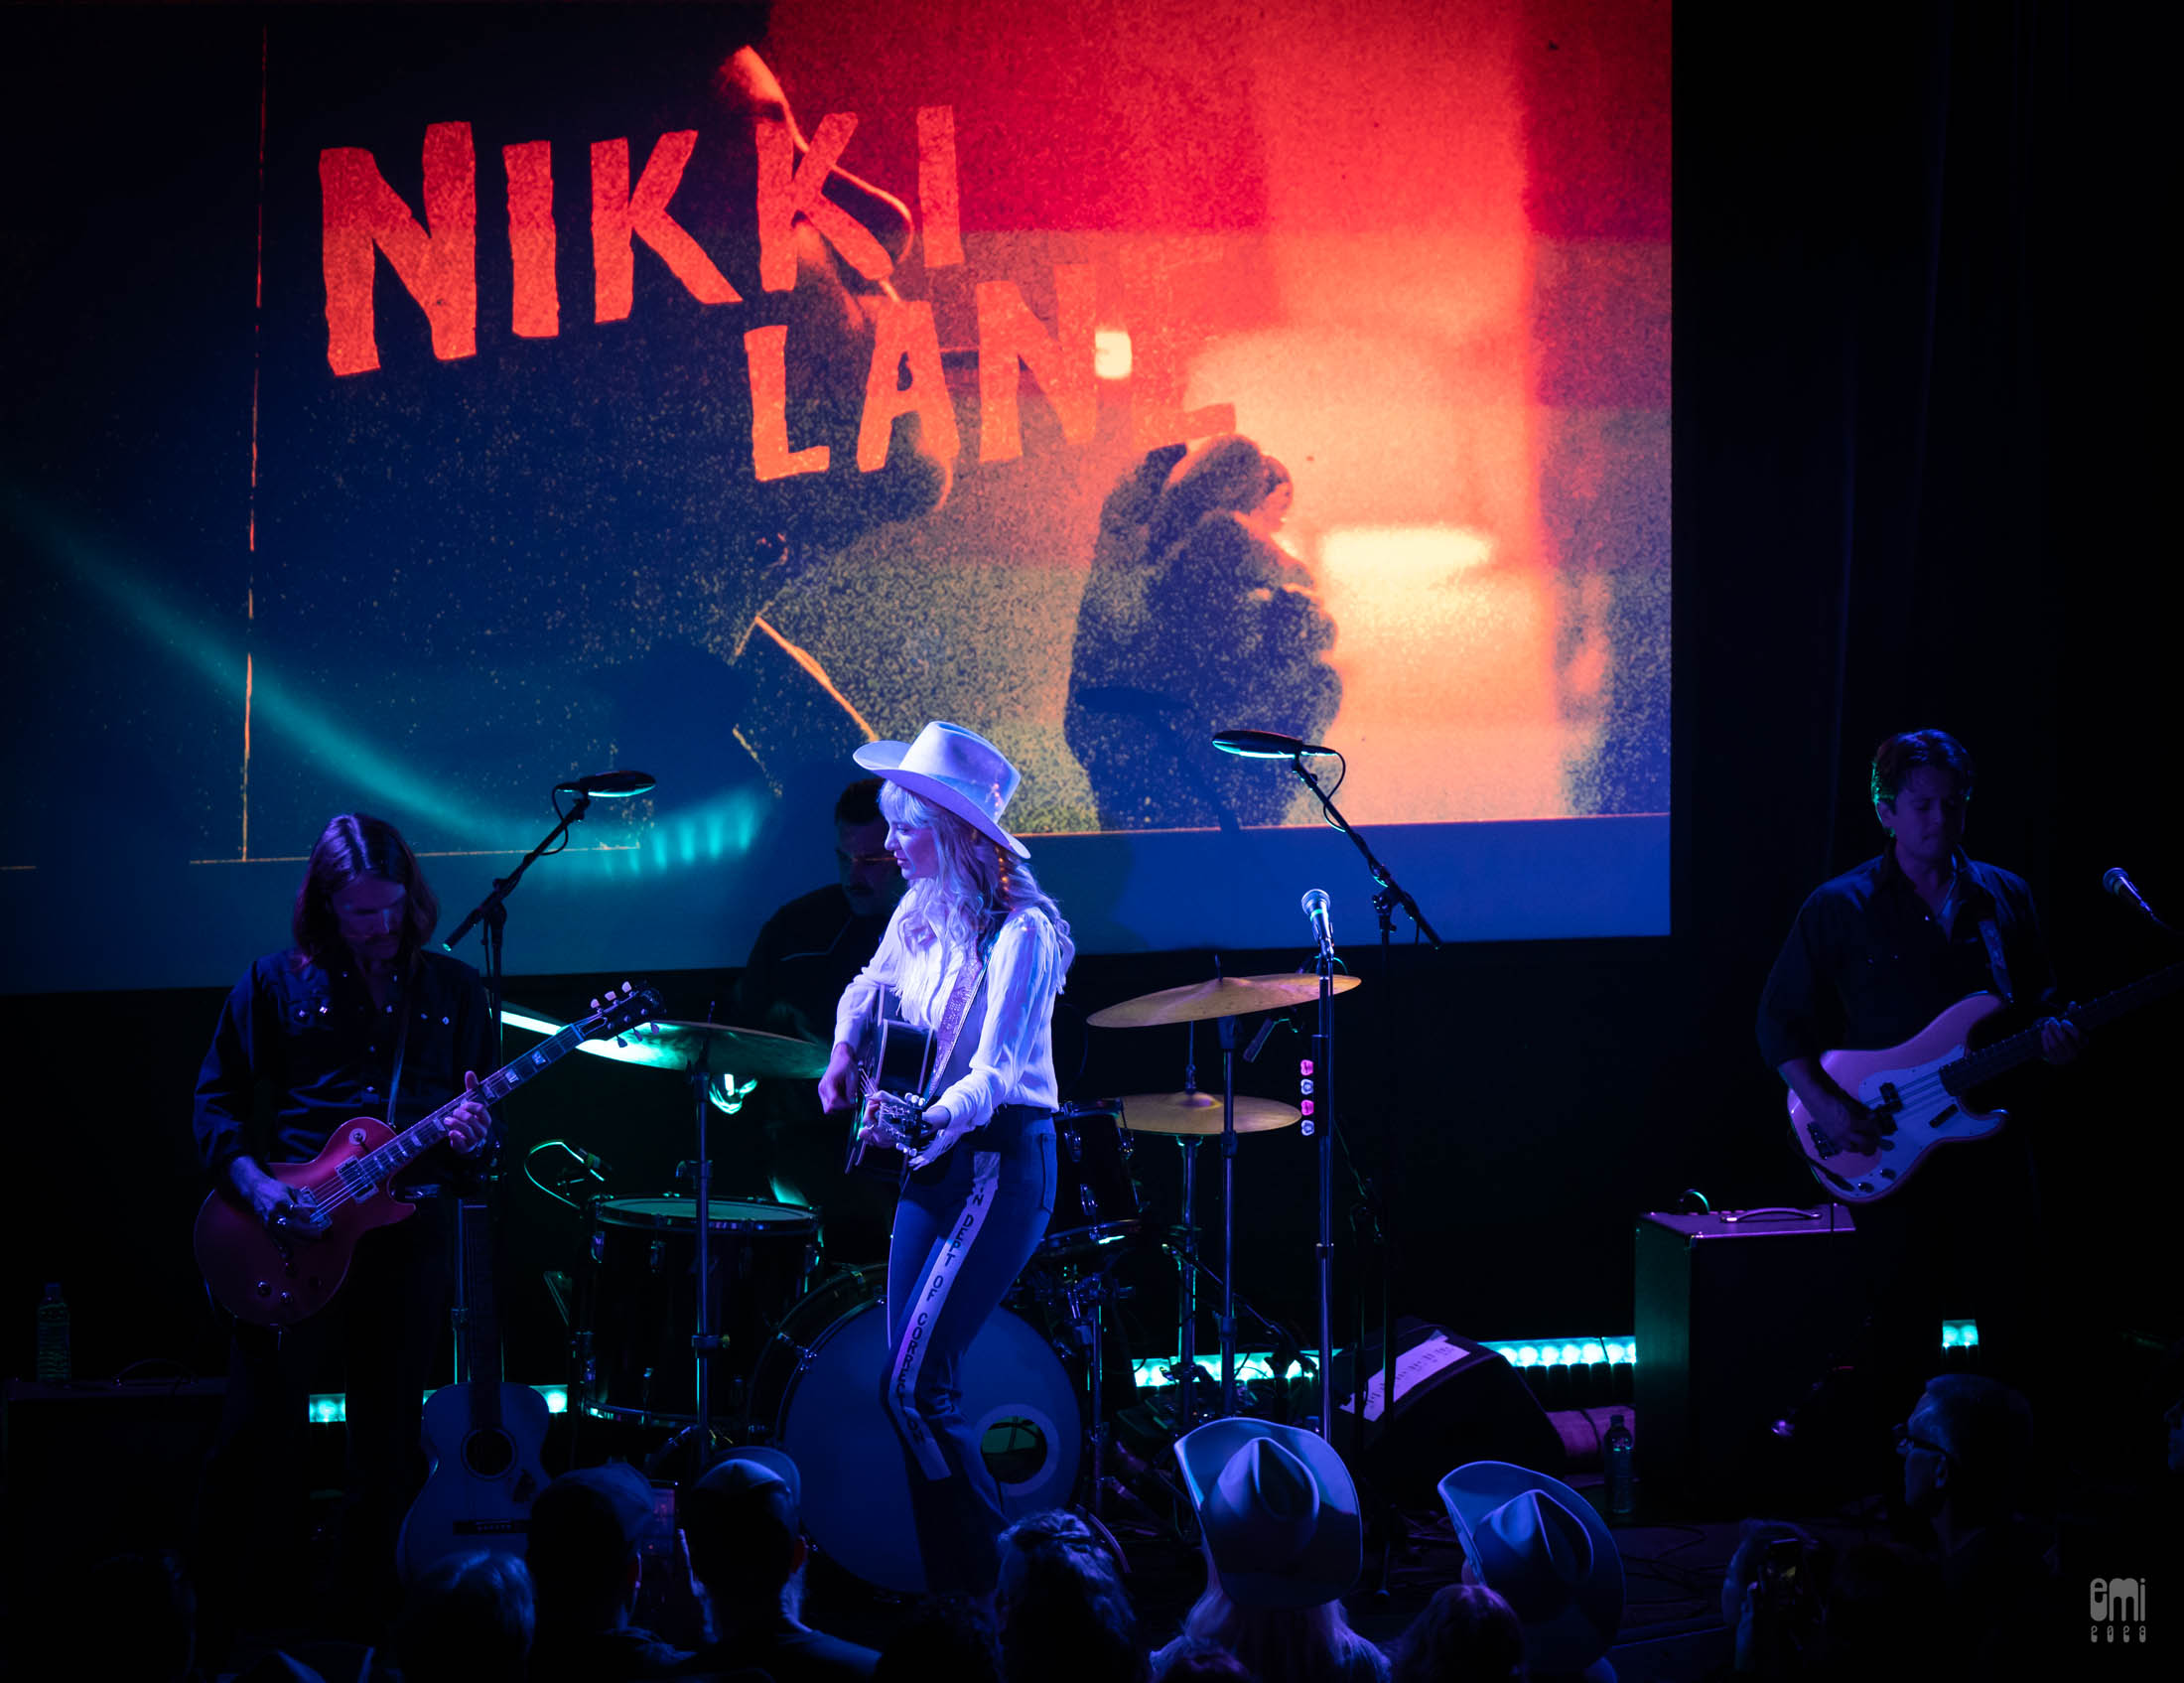 2023.4.24 Nikki Lane at The Chapel SF CA. photo by emi